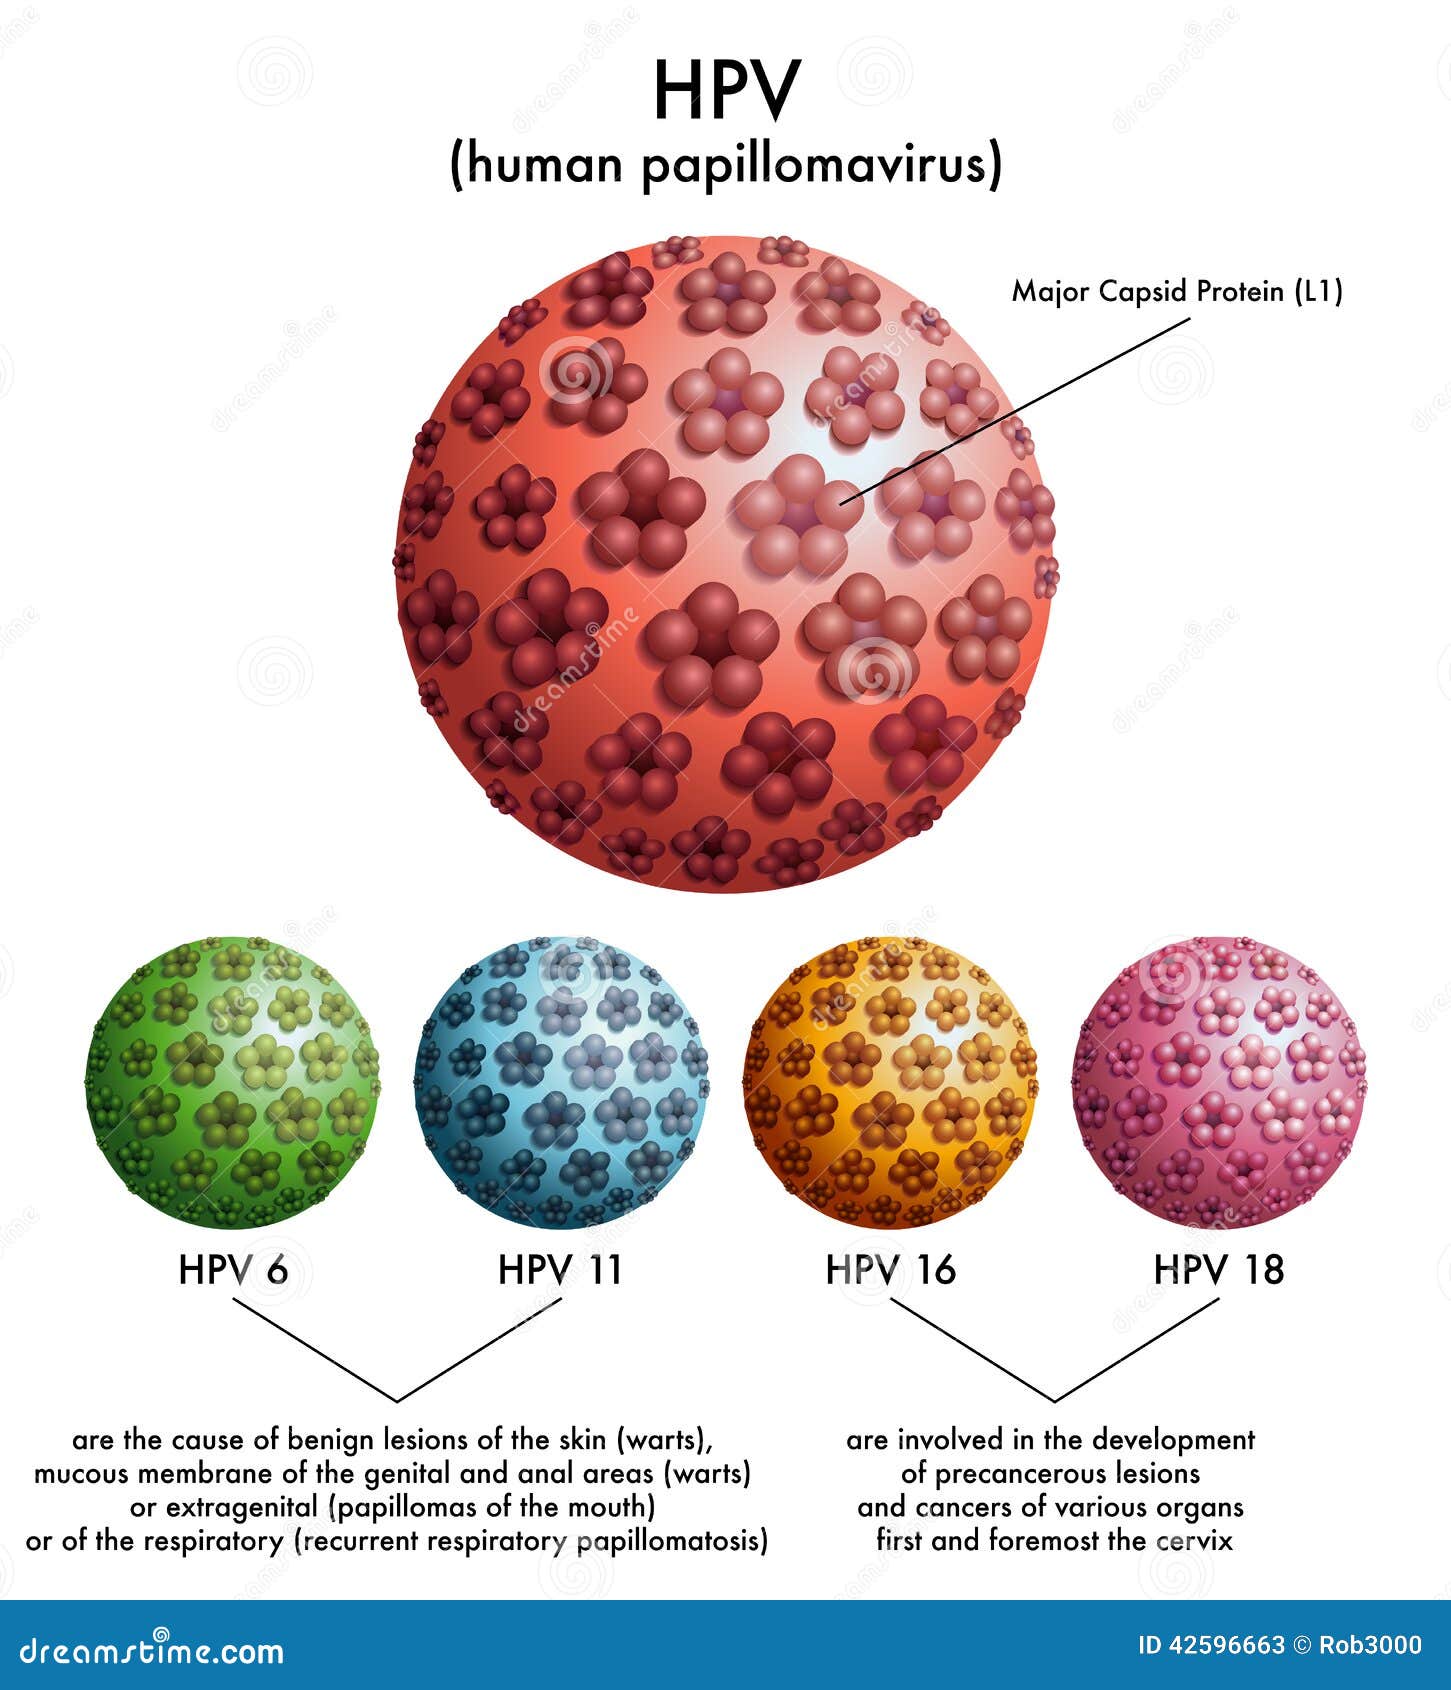 Hpv virus infection, Human papillomavirus 52 positive squamous cell carcinoma of the conjunctiva